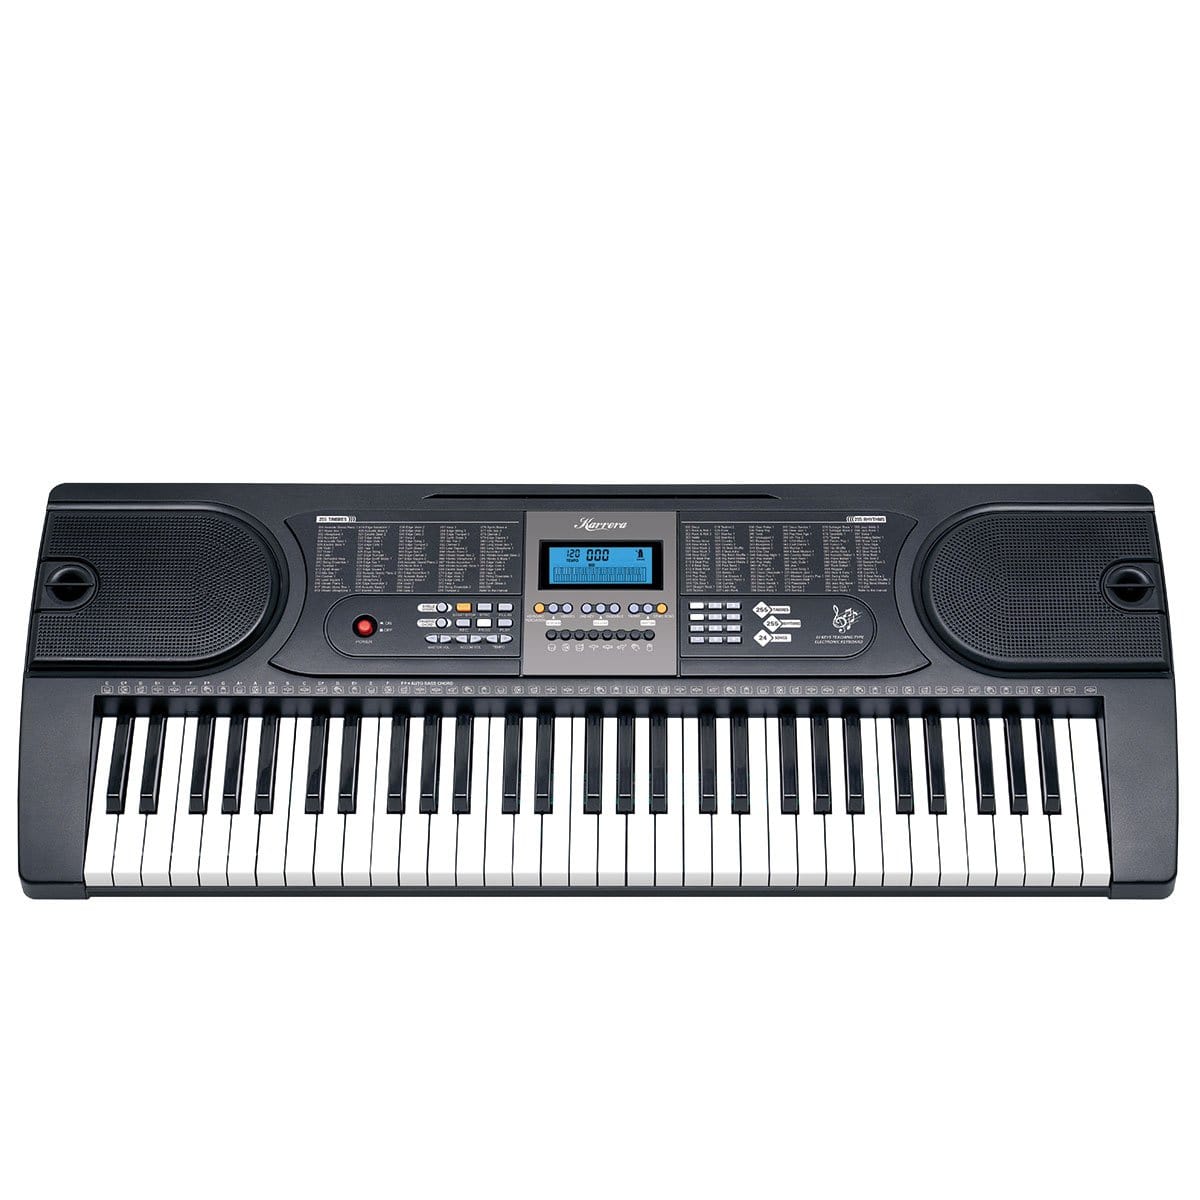 61 Keys Electronic Keyboard Piano With Stand - Black